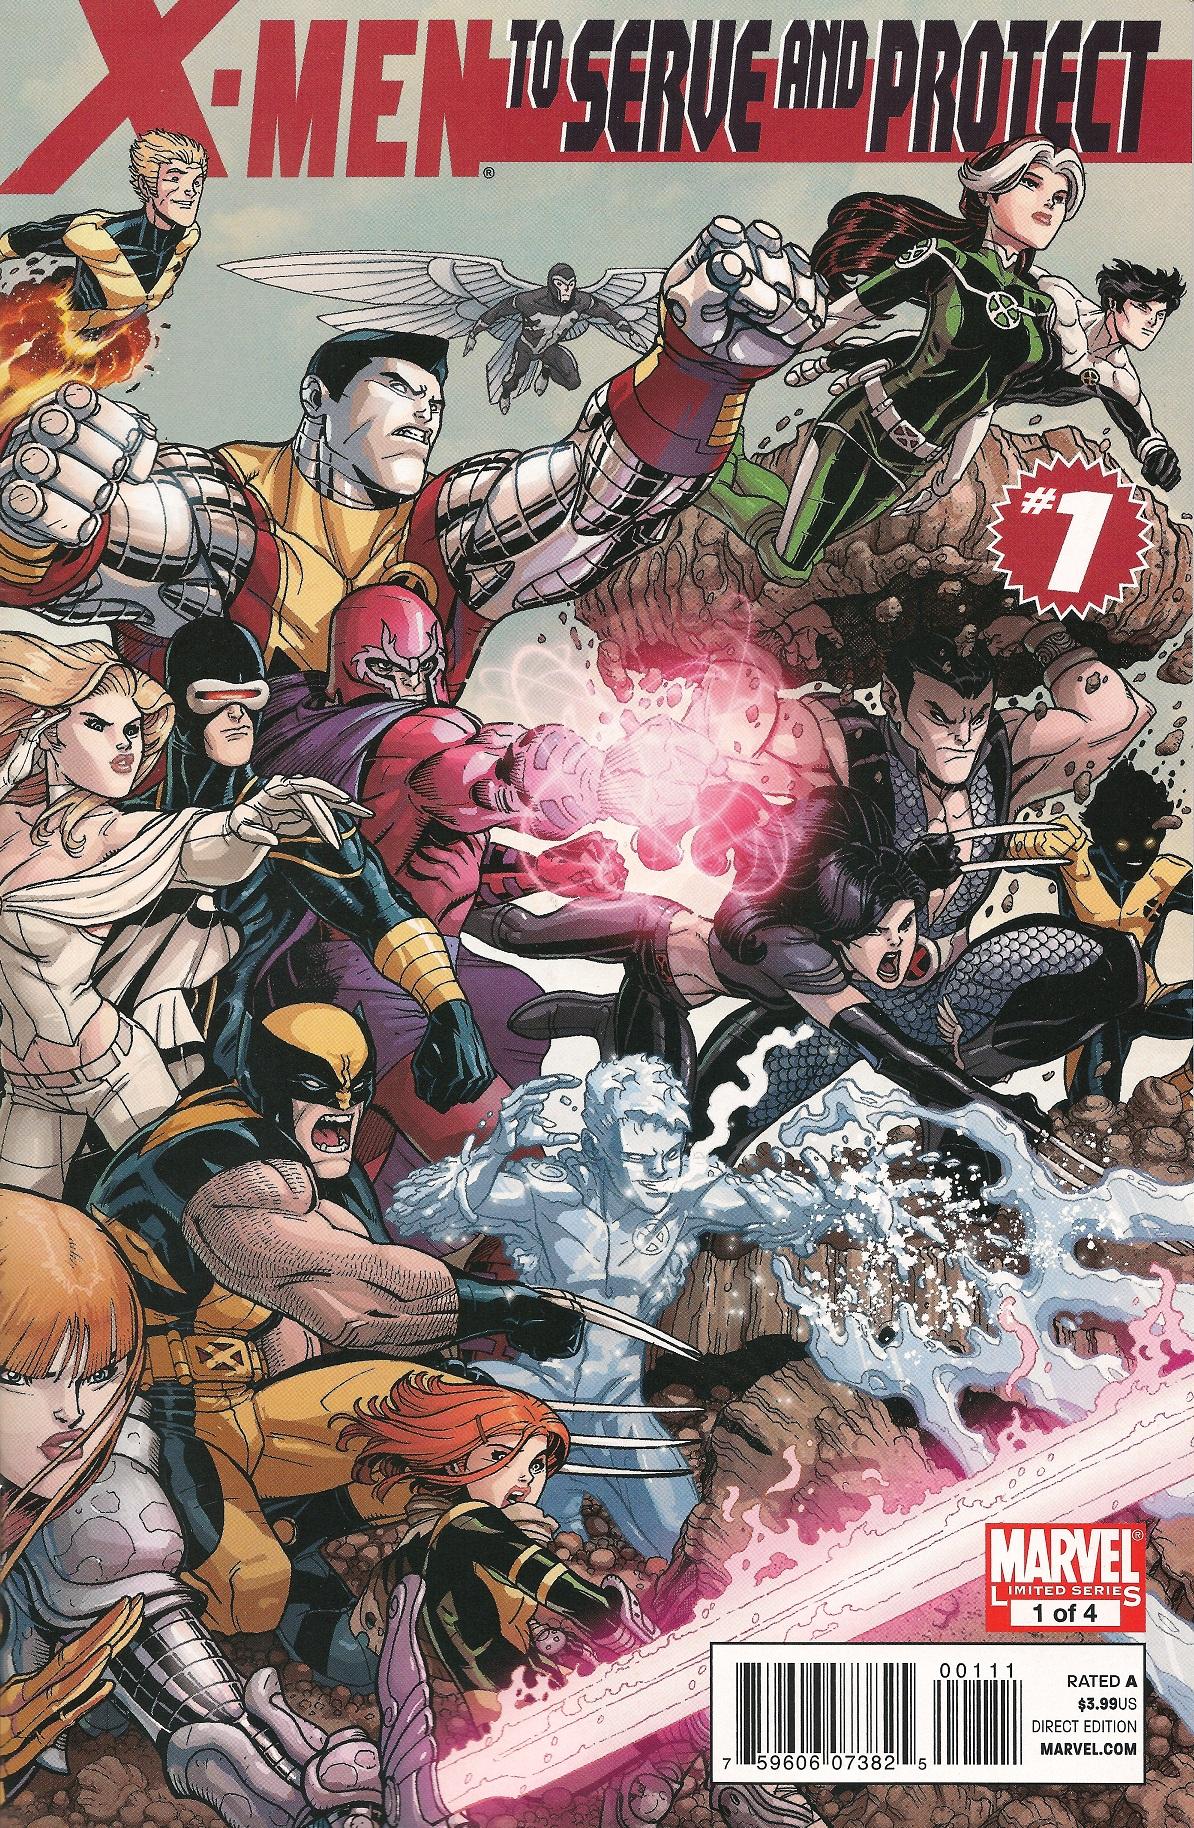 X-Men: To Serve and Protect Vol. 1 #1